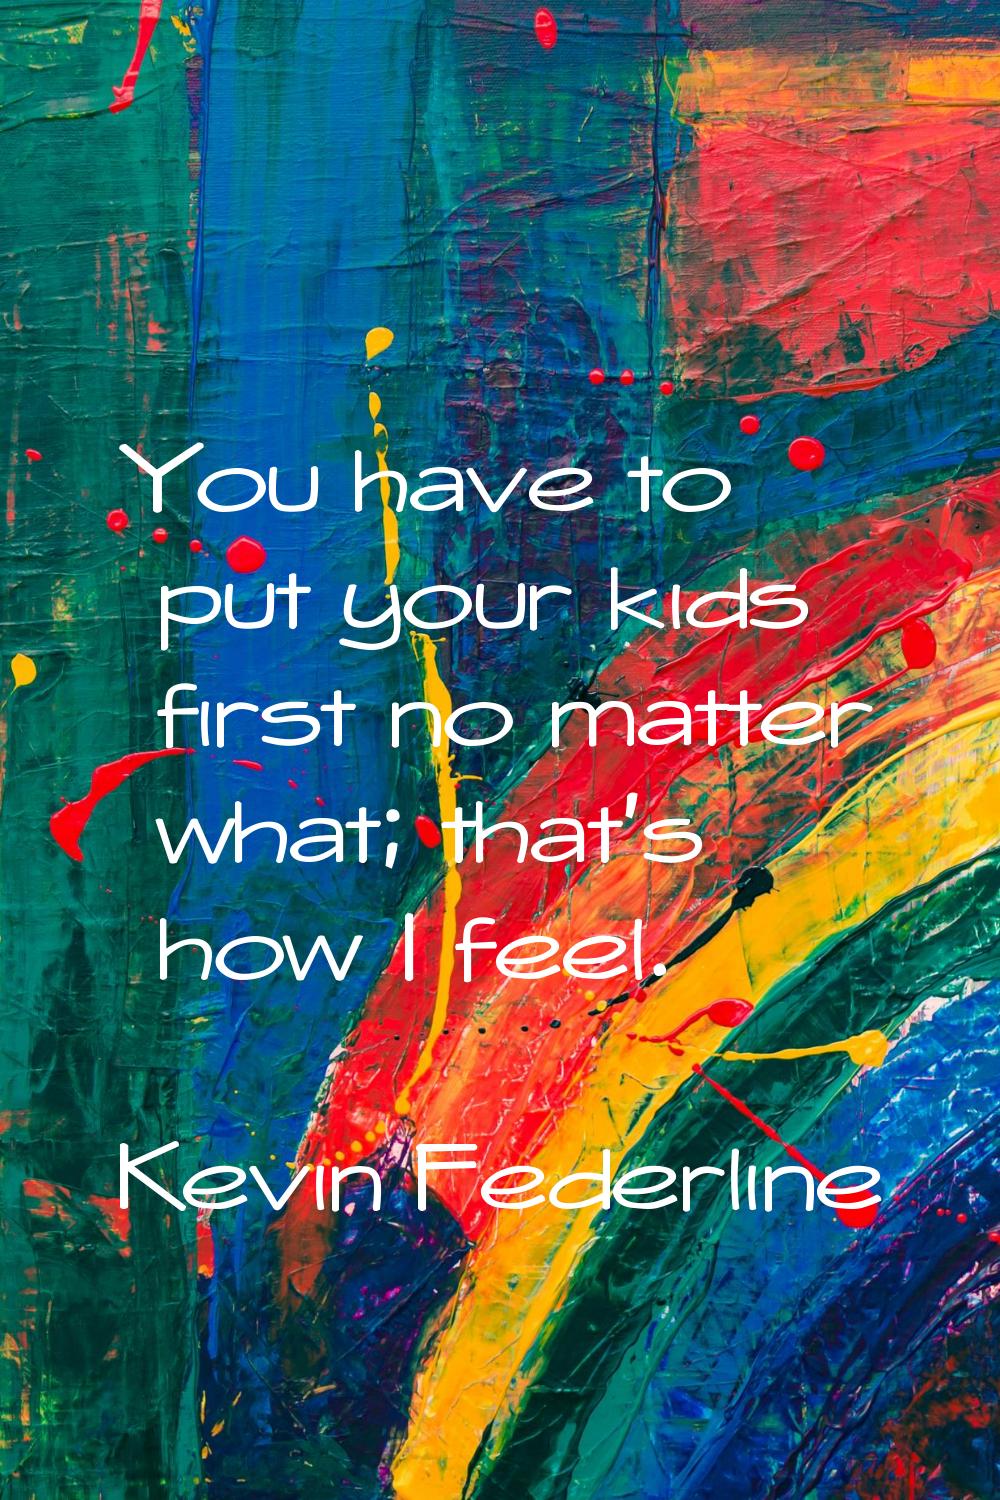 You have to put your kids first no matter what; that's how I feel.